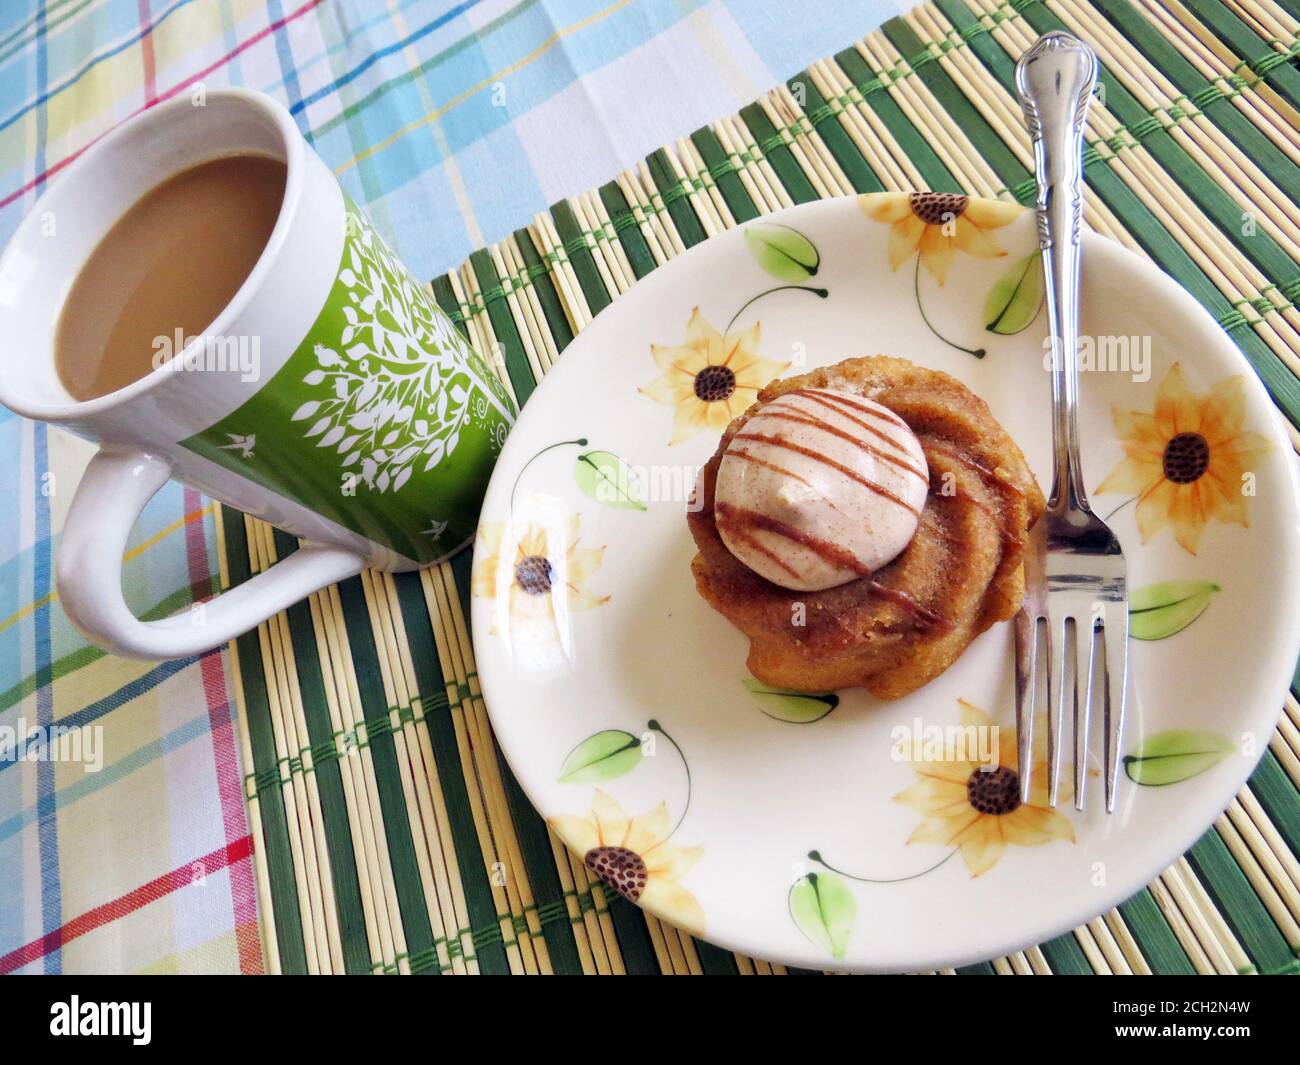 Small cake on a plate with a cup of coffee Stock Photo